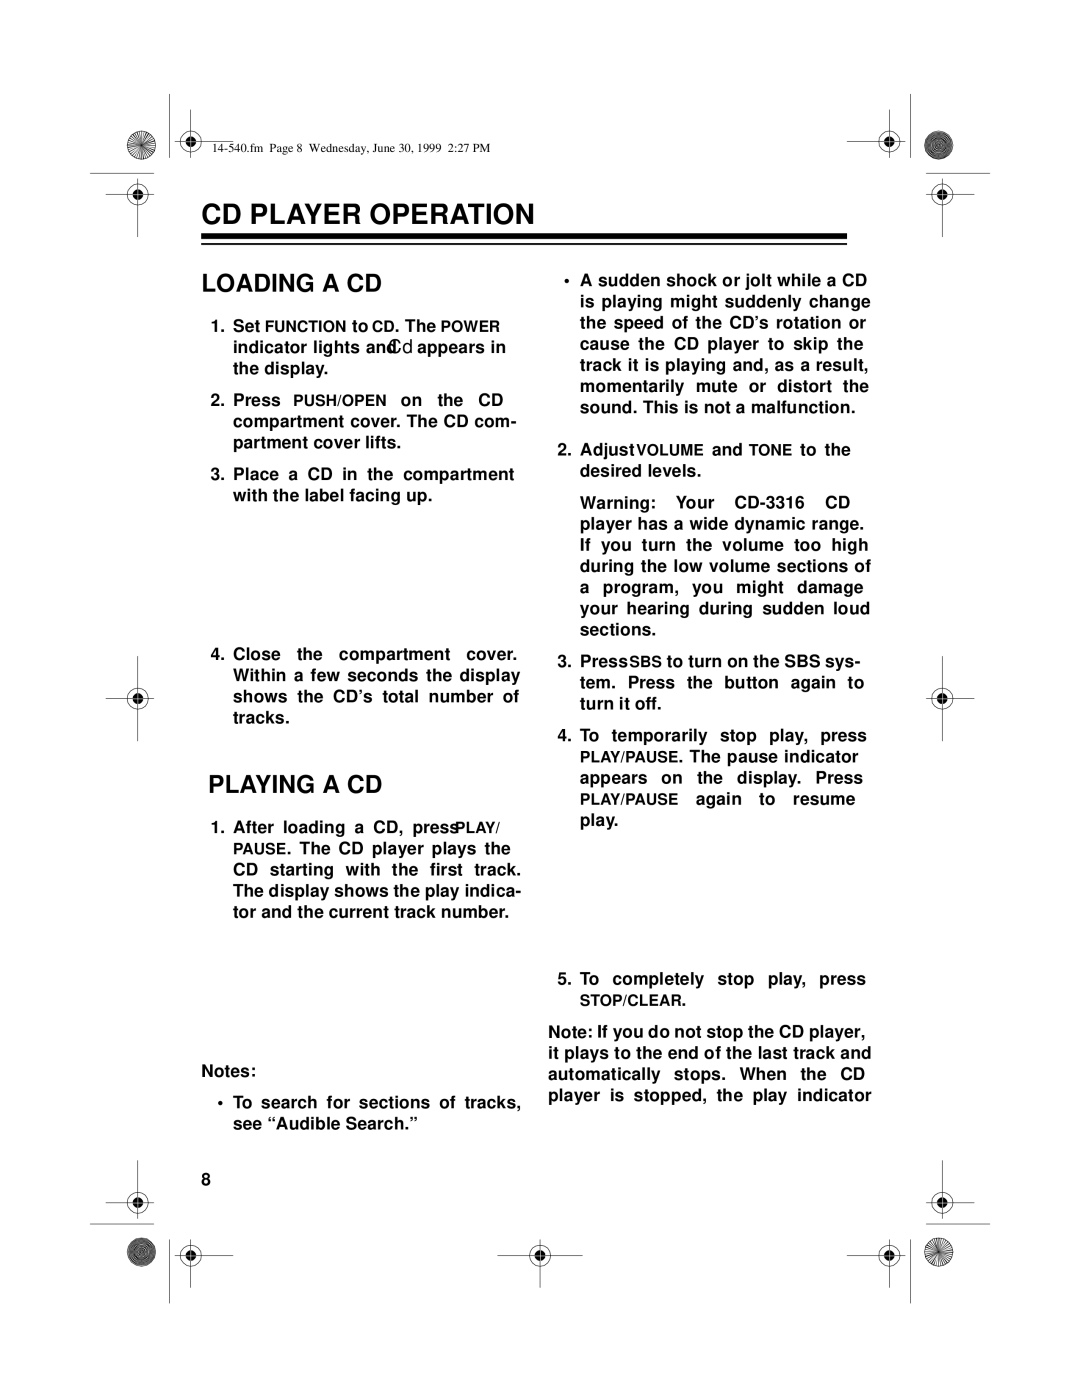 Radio Shack CD-3316 owner manual CD Player Operation, Loading a CD, Playing a CD 